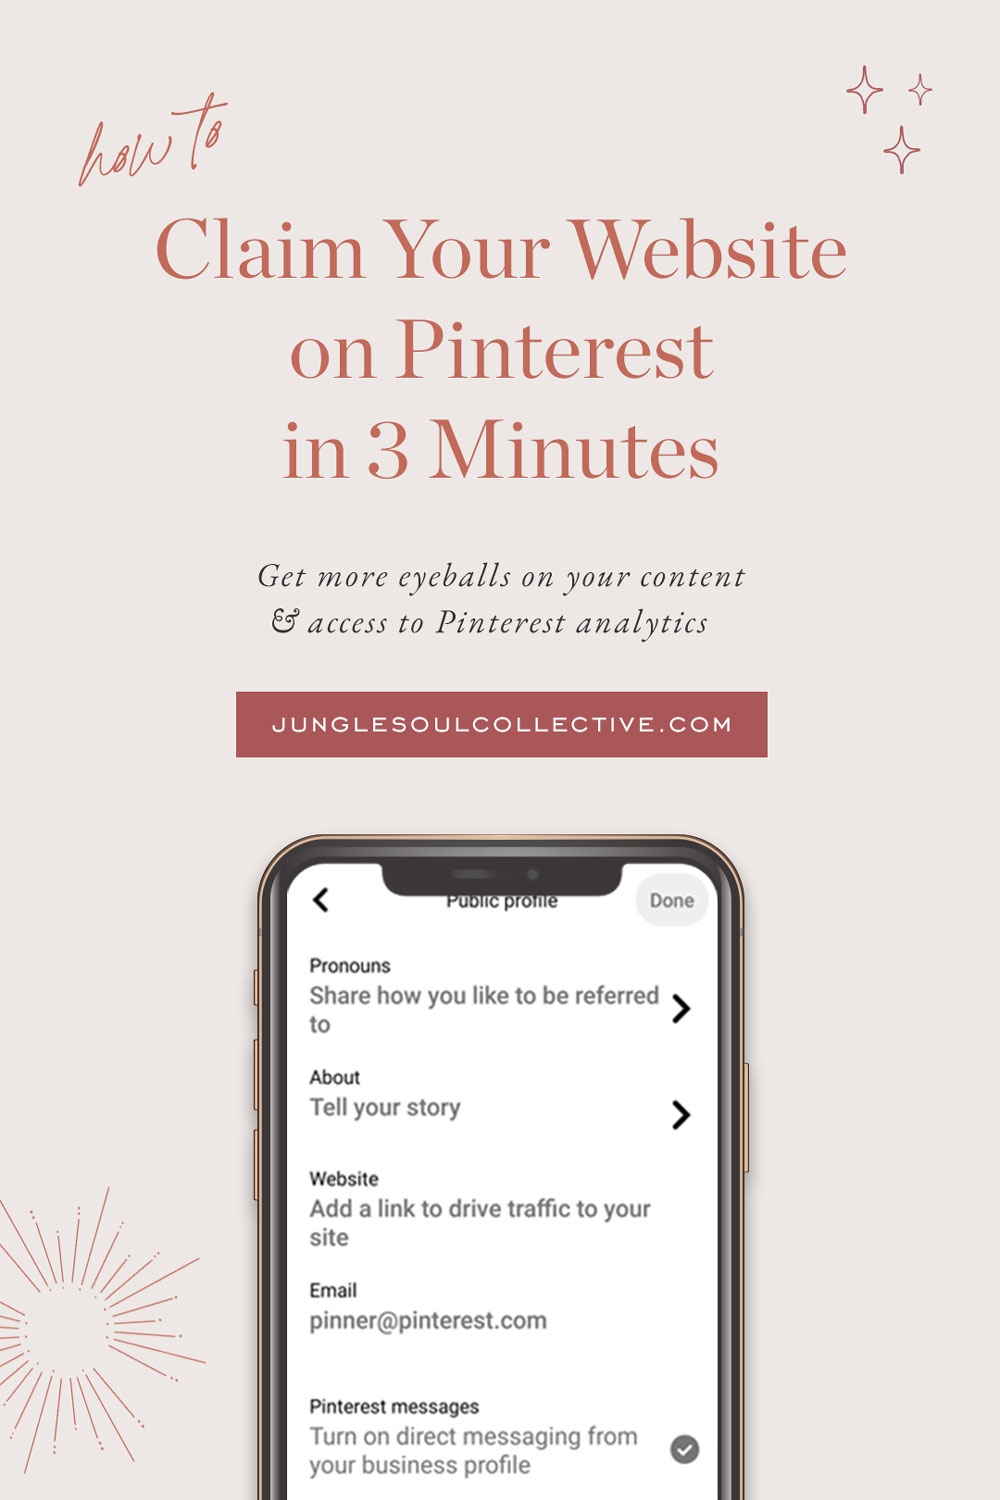 How to Claim Your Website on Pinterest